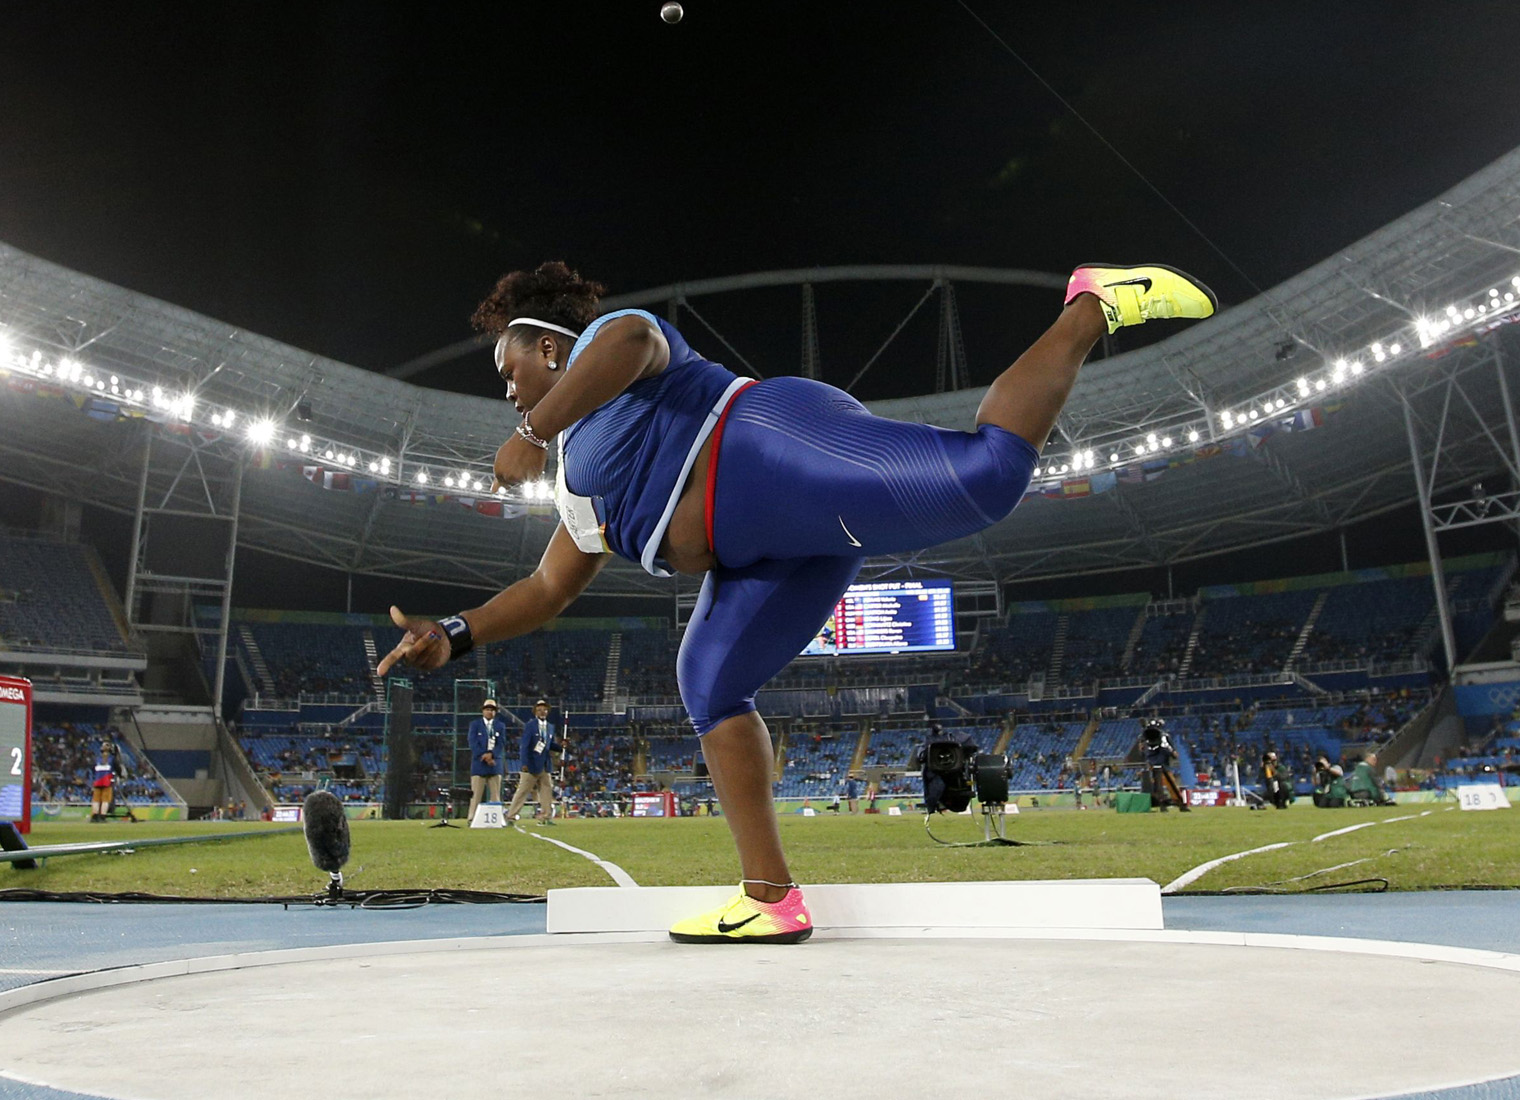 TOPSHOT - USA's Michelle Carter competes in the Women's Shot Put Final during the athletics event at the Rio 2016 Olympic Games at the Olympic Stadium in Rio de Janeiro on August 12, 2016. / AFP / Adrian DENNIS (Photo credit should read ADRIAN DENNIS/AFP/Getty Images)